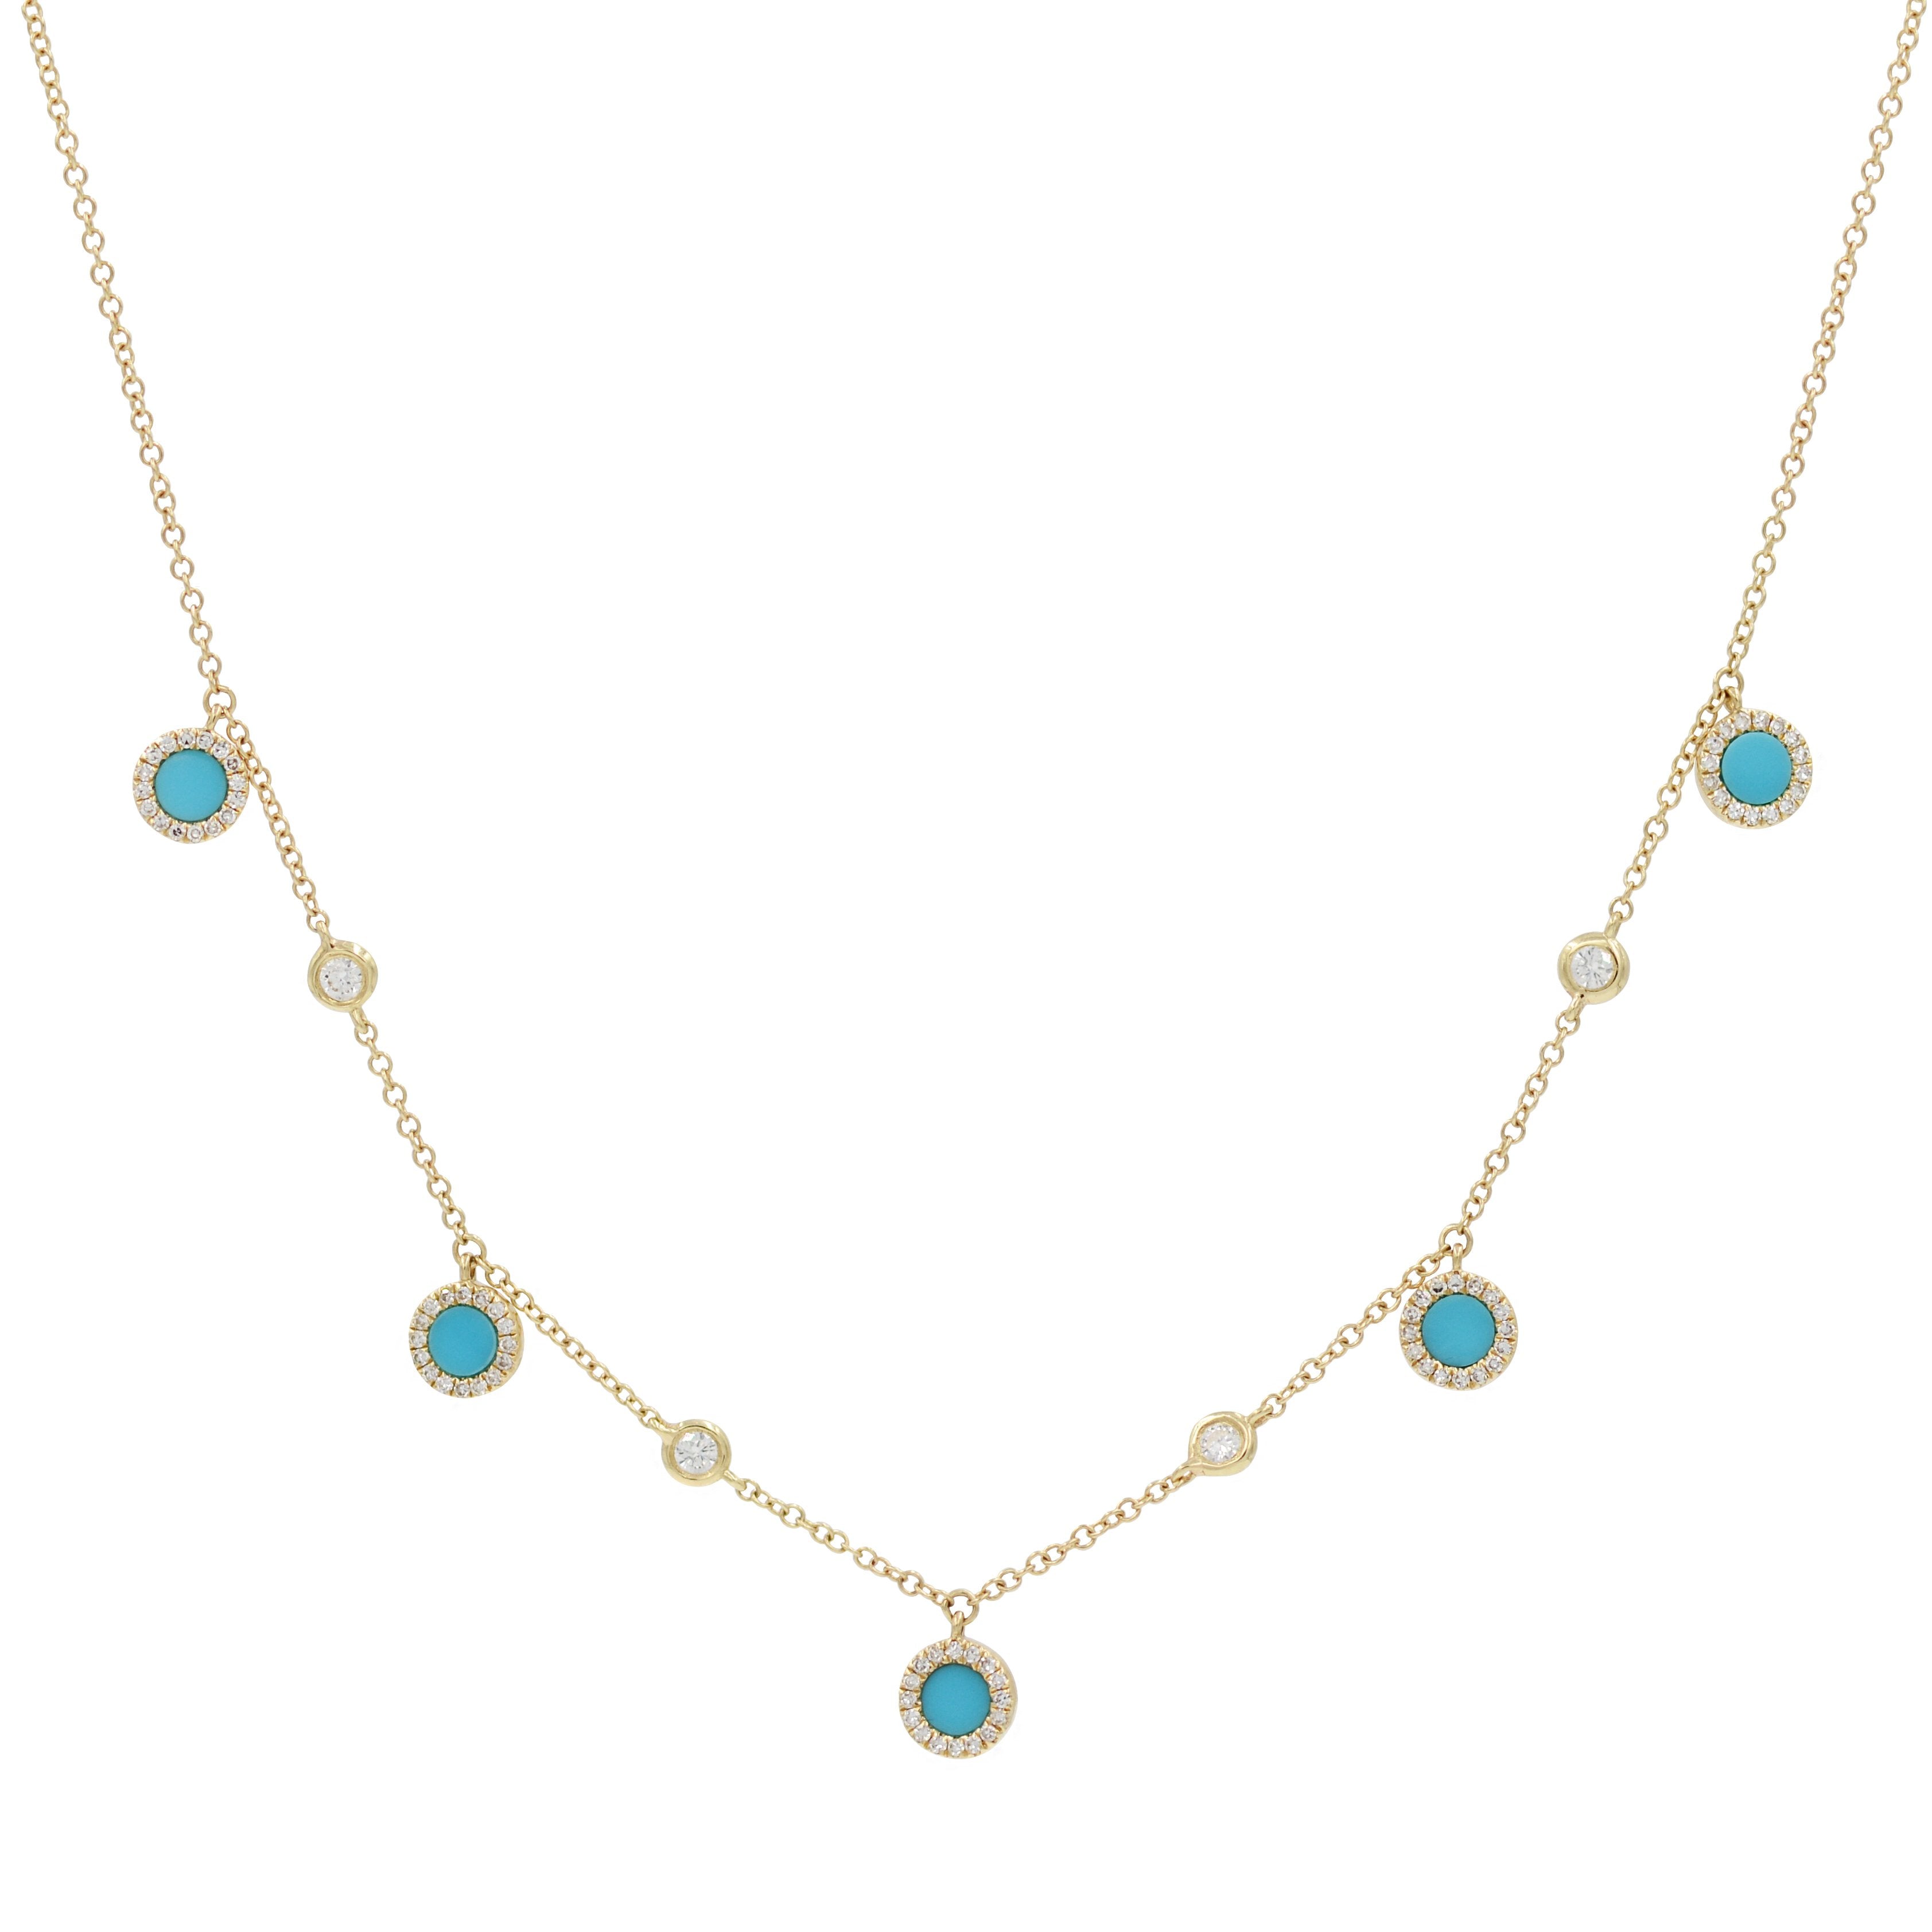 Turquoise Diamond Choker Necklace in 14k Gold